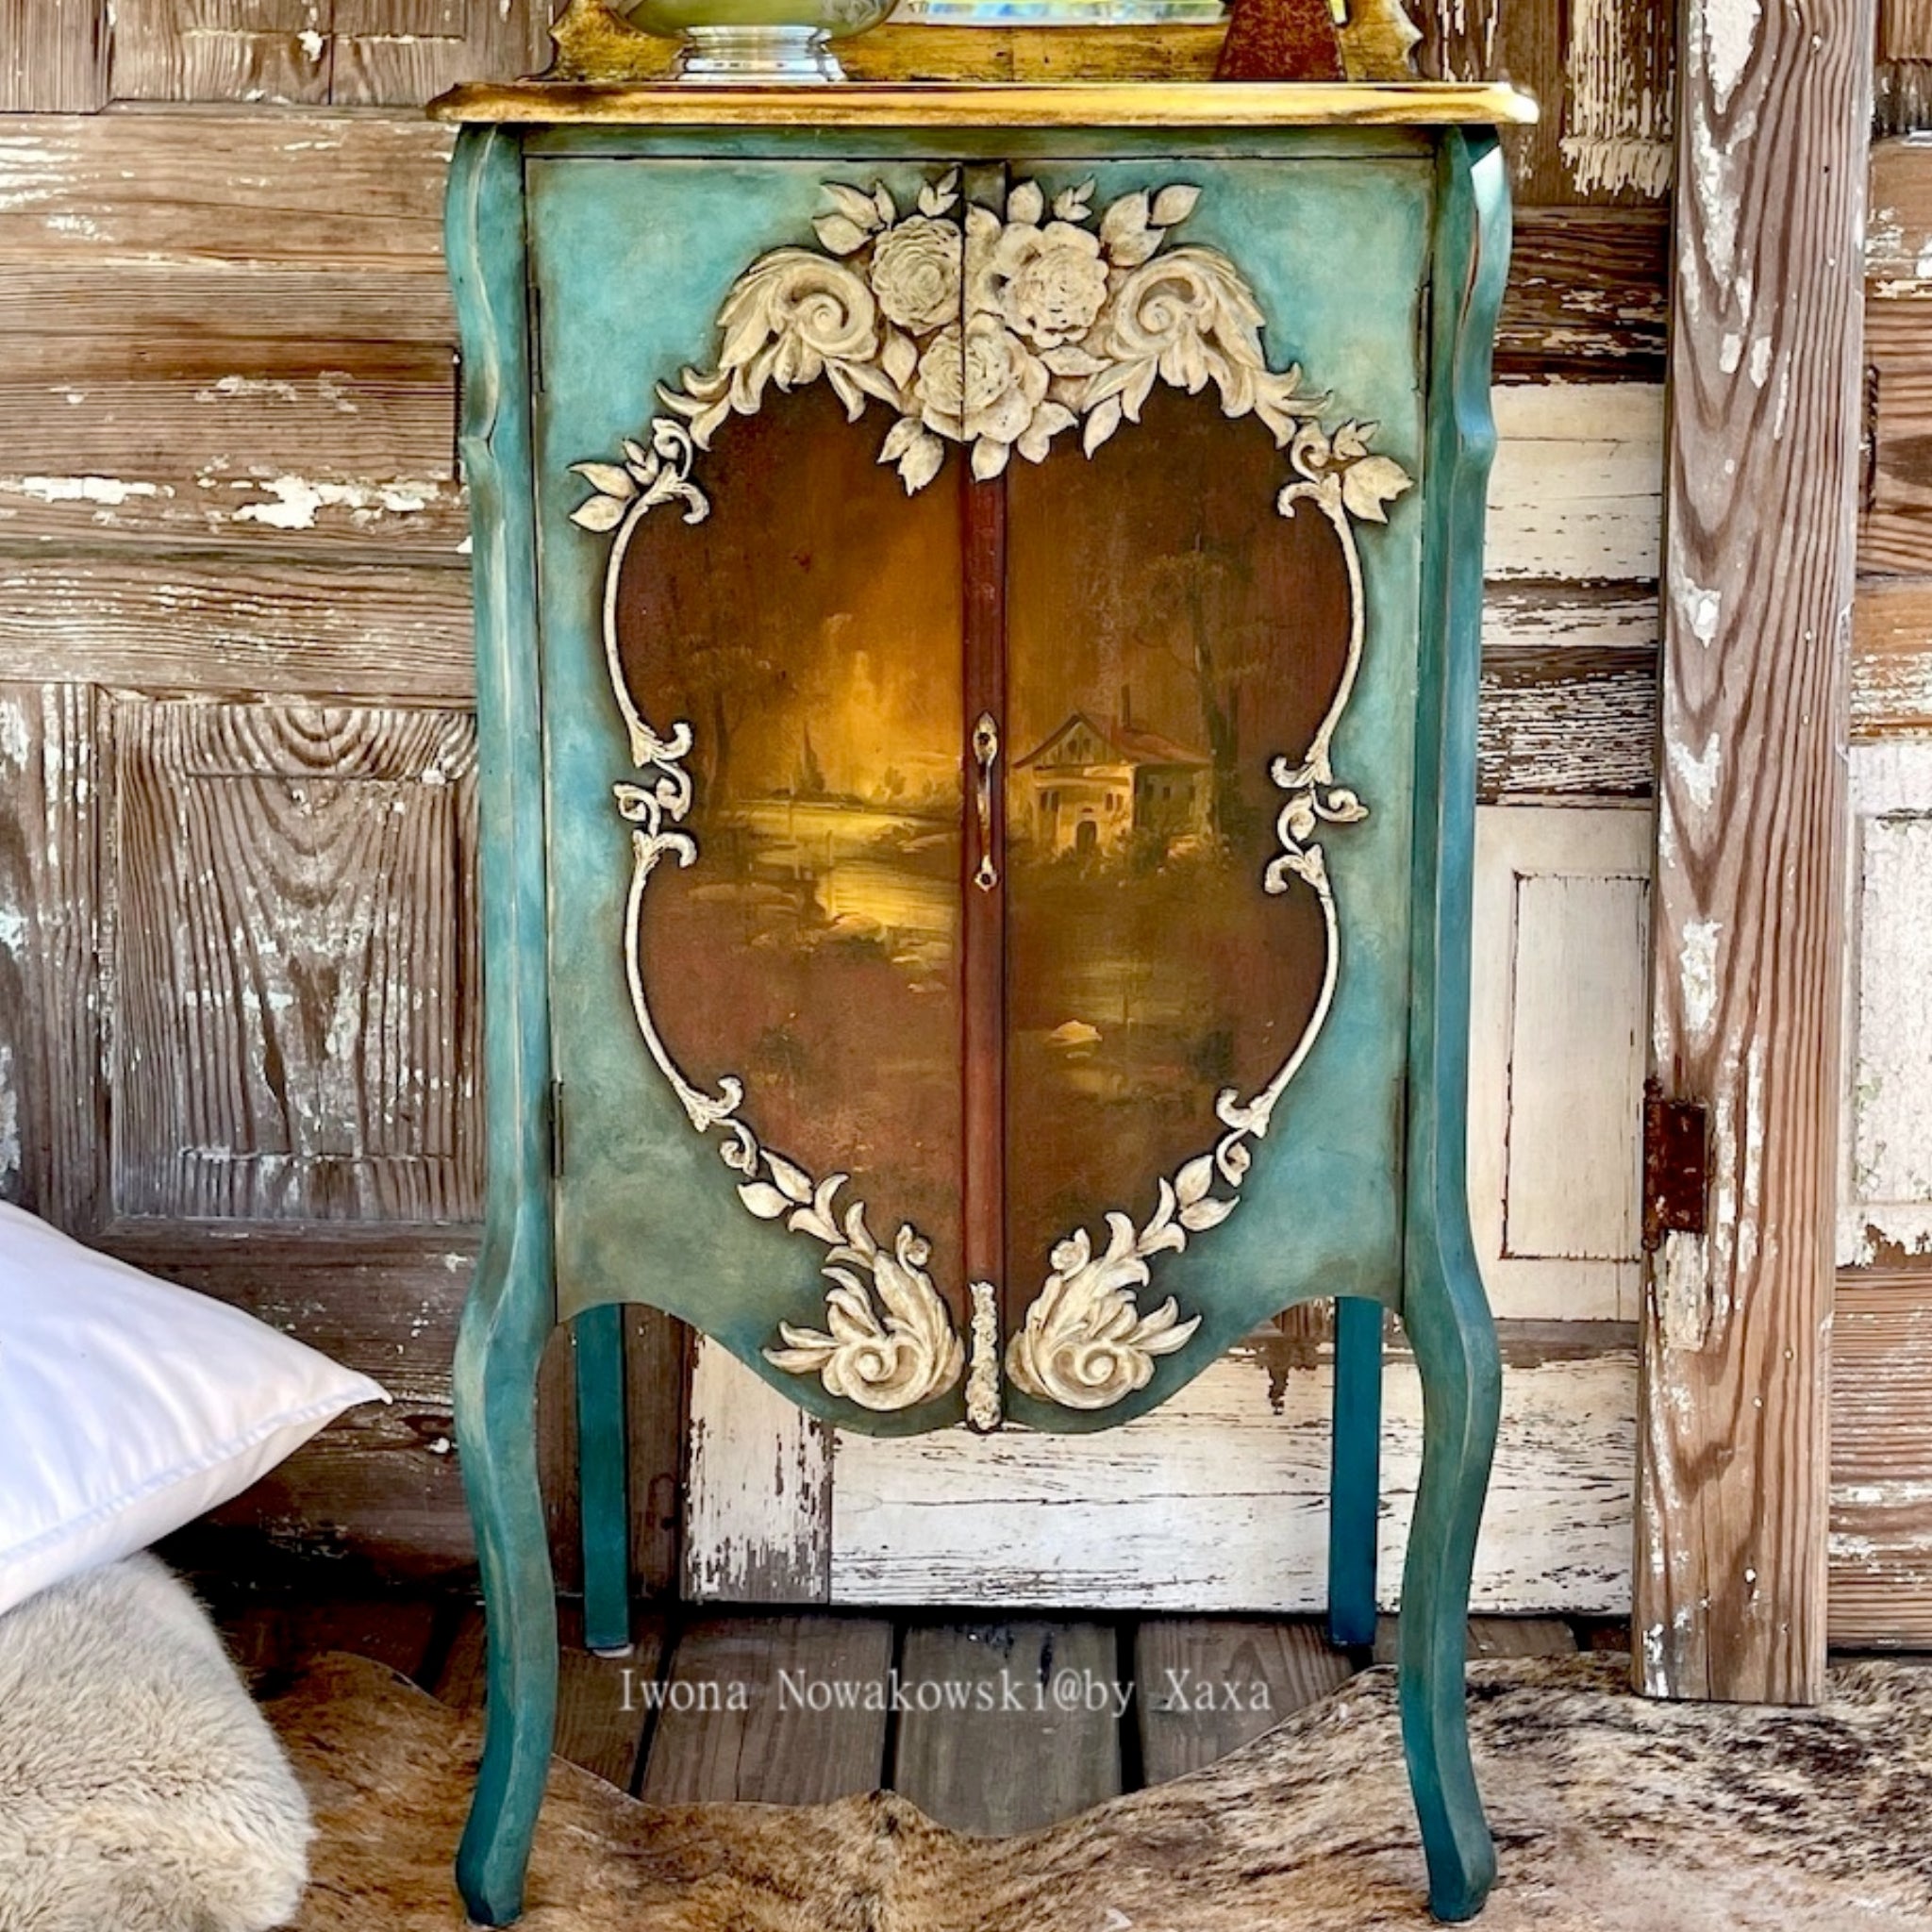 A vintage small armoire refurbished by Iwona Nowakowski @ by Xaxa is painted teal-blue and features ReDesign with Prima's Victorian Rose silicone mould around an antique brown decoupage paper design.